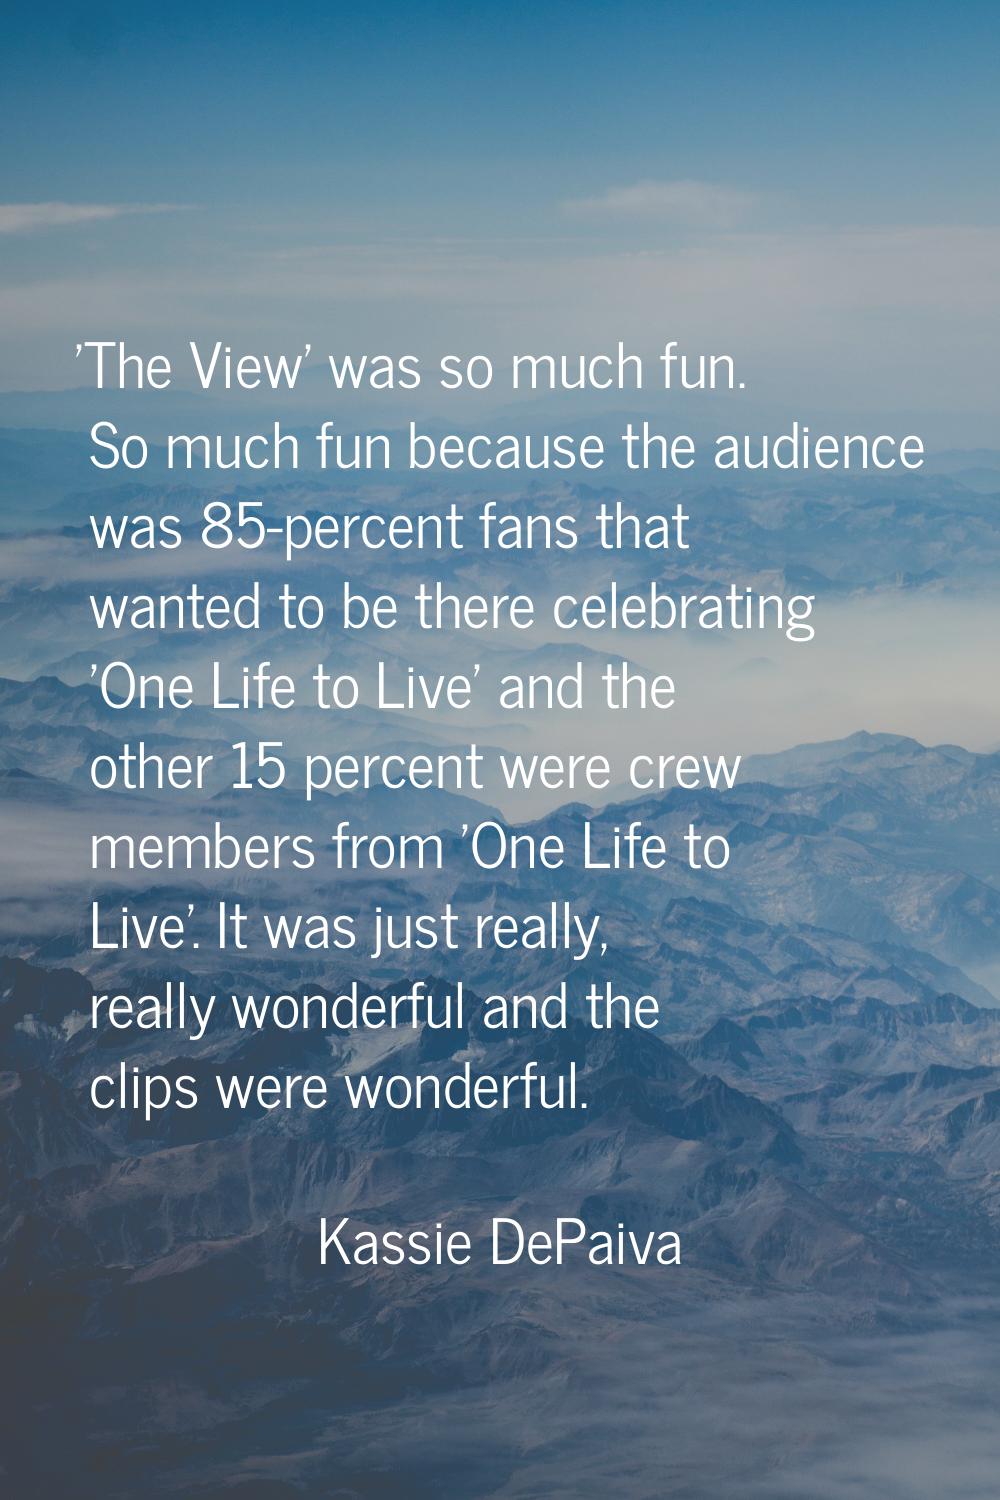 'The View' was so much fun. So much fun because the audience was 85-percent fans that wanted to be 